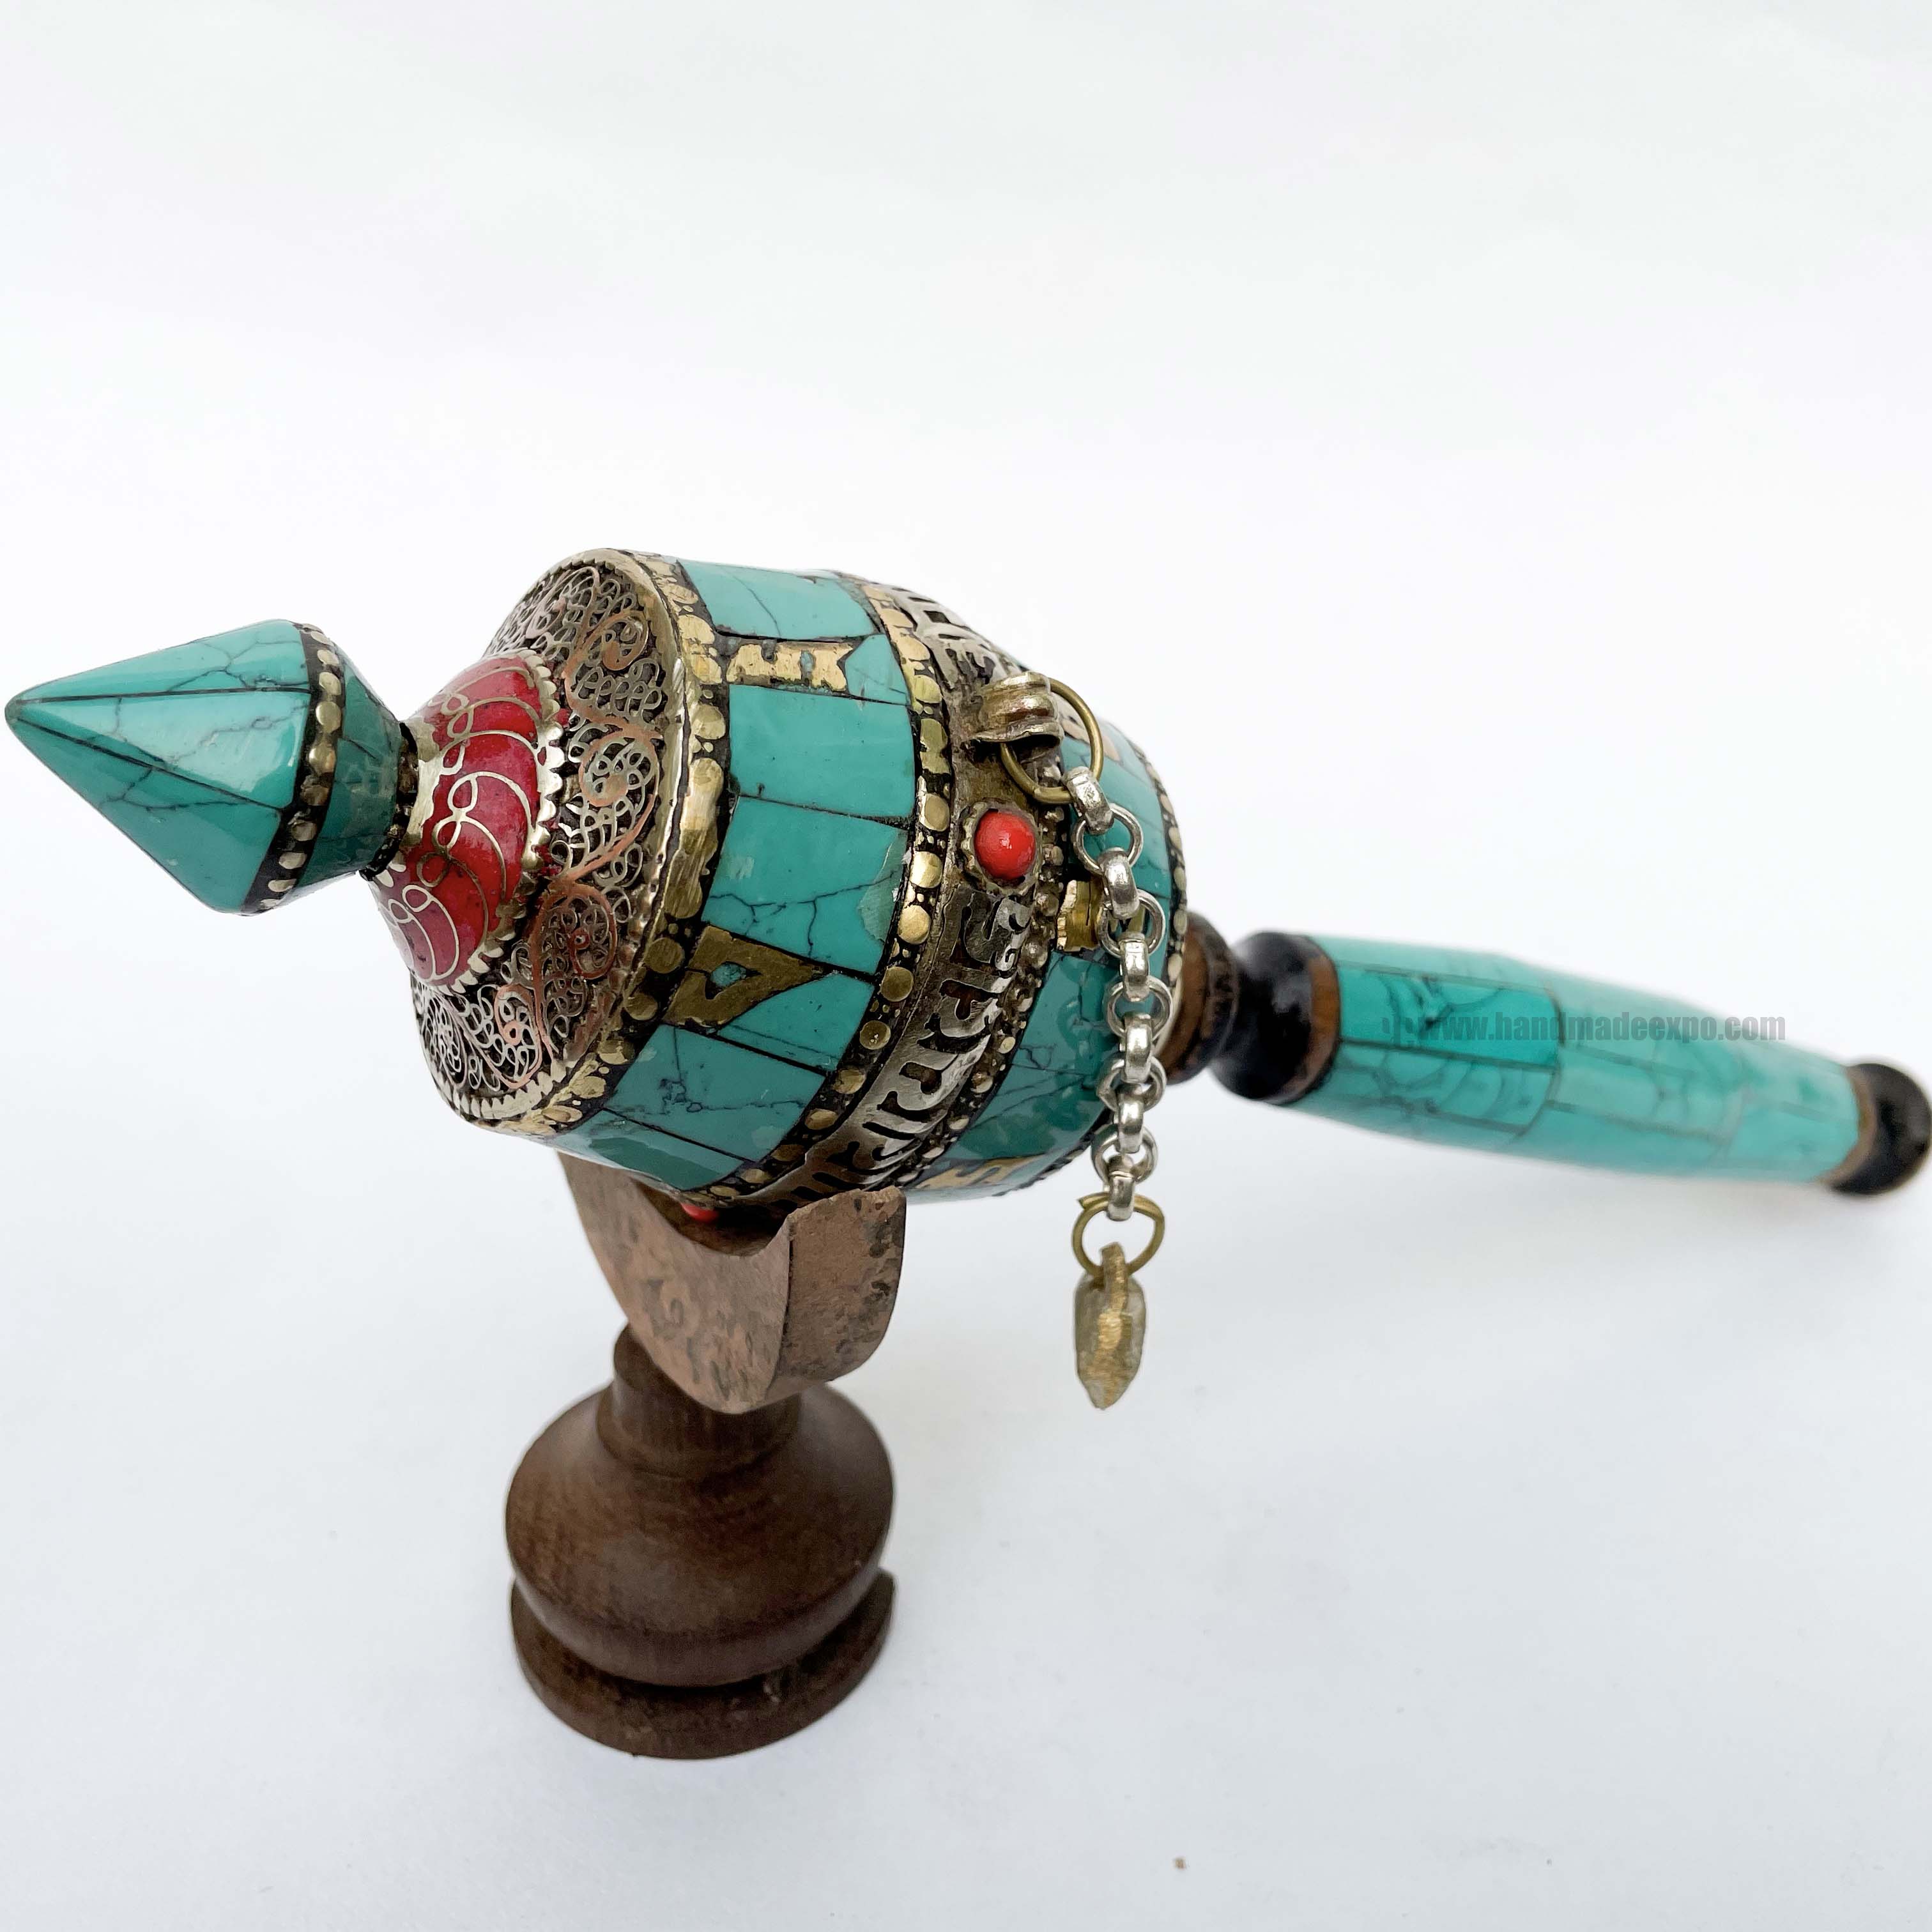 Brass Hand Held With Mantra Prayer Wheel, stone Setting, Blue And Red Color